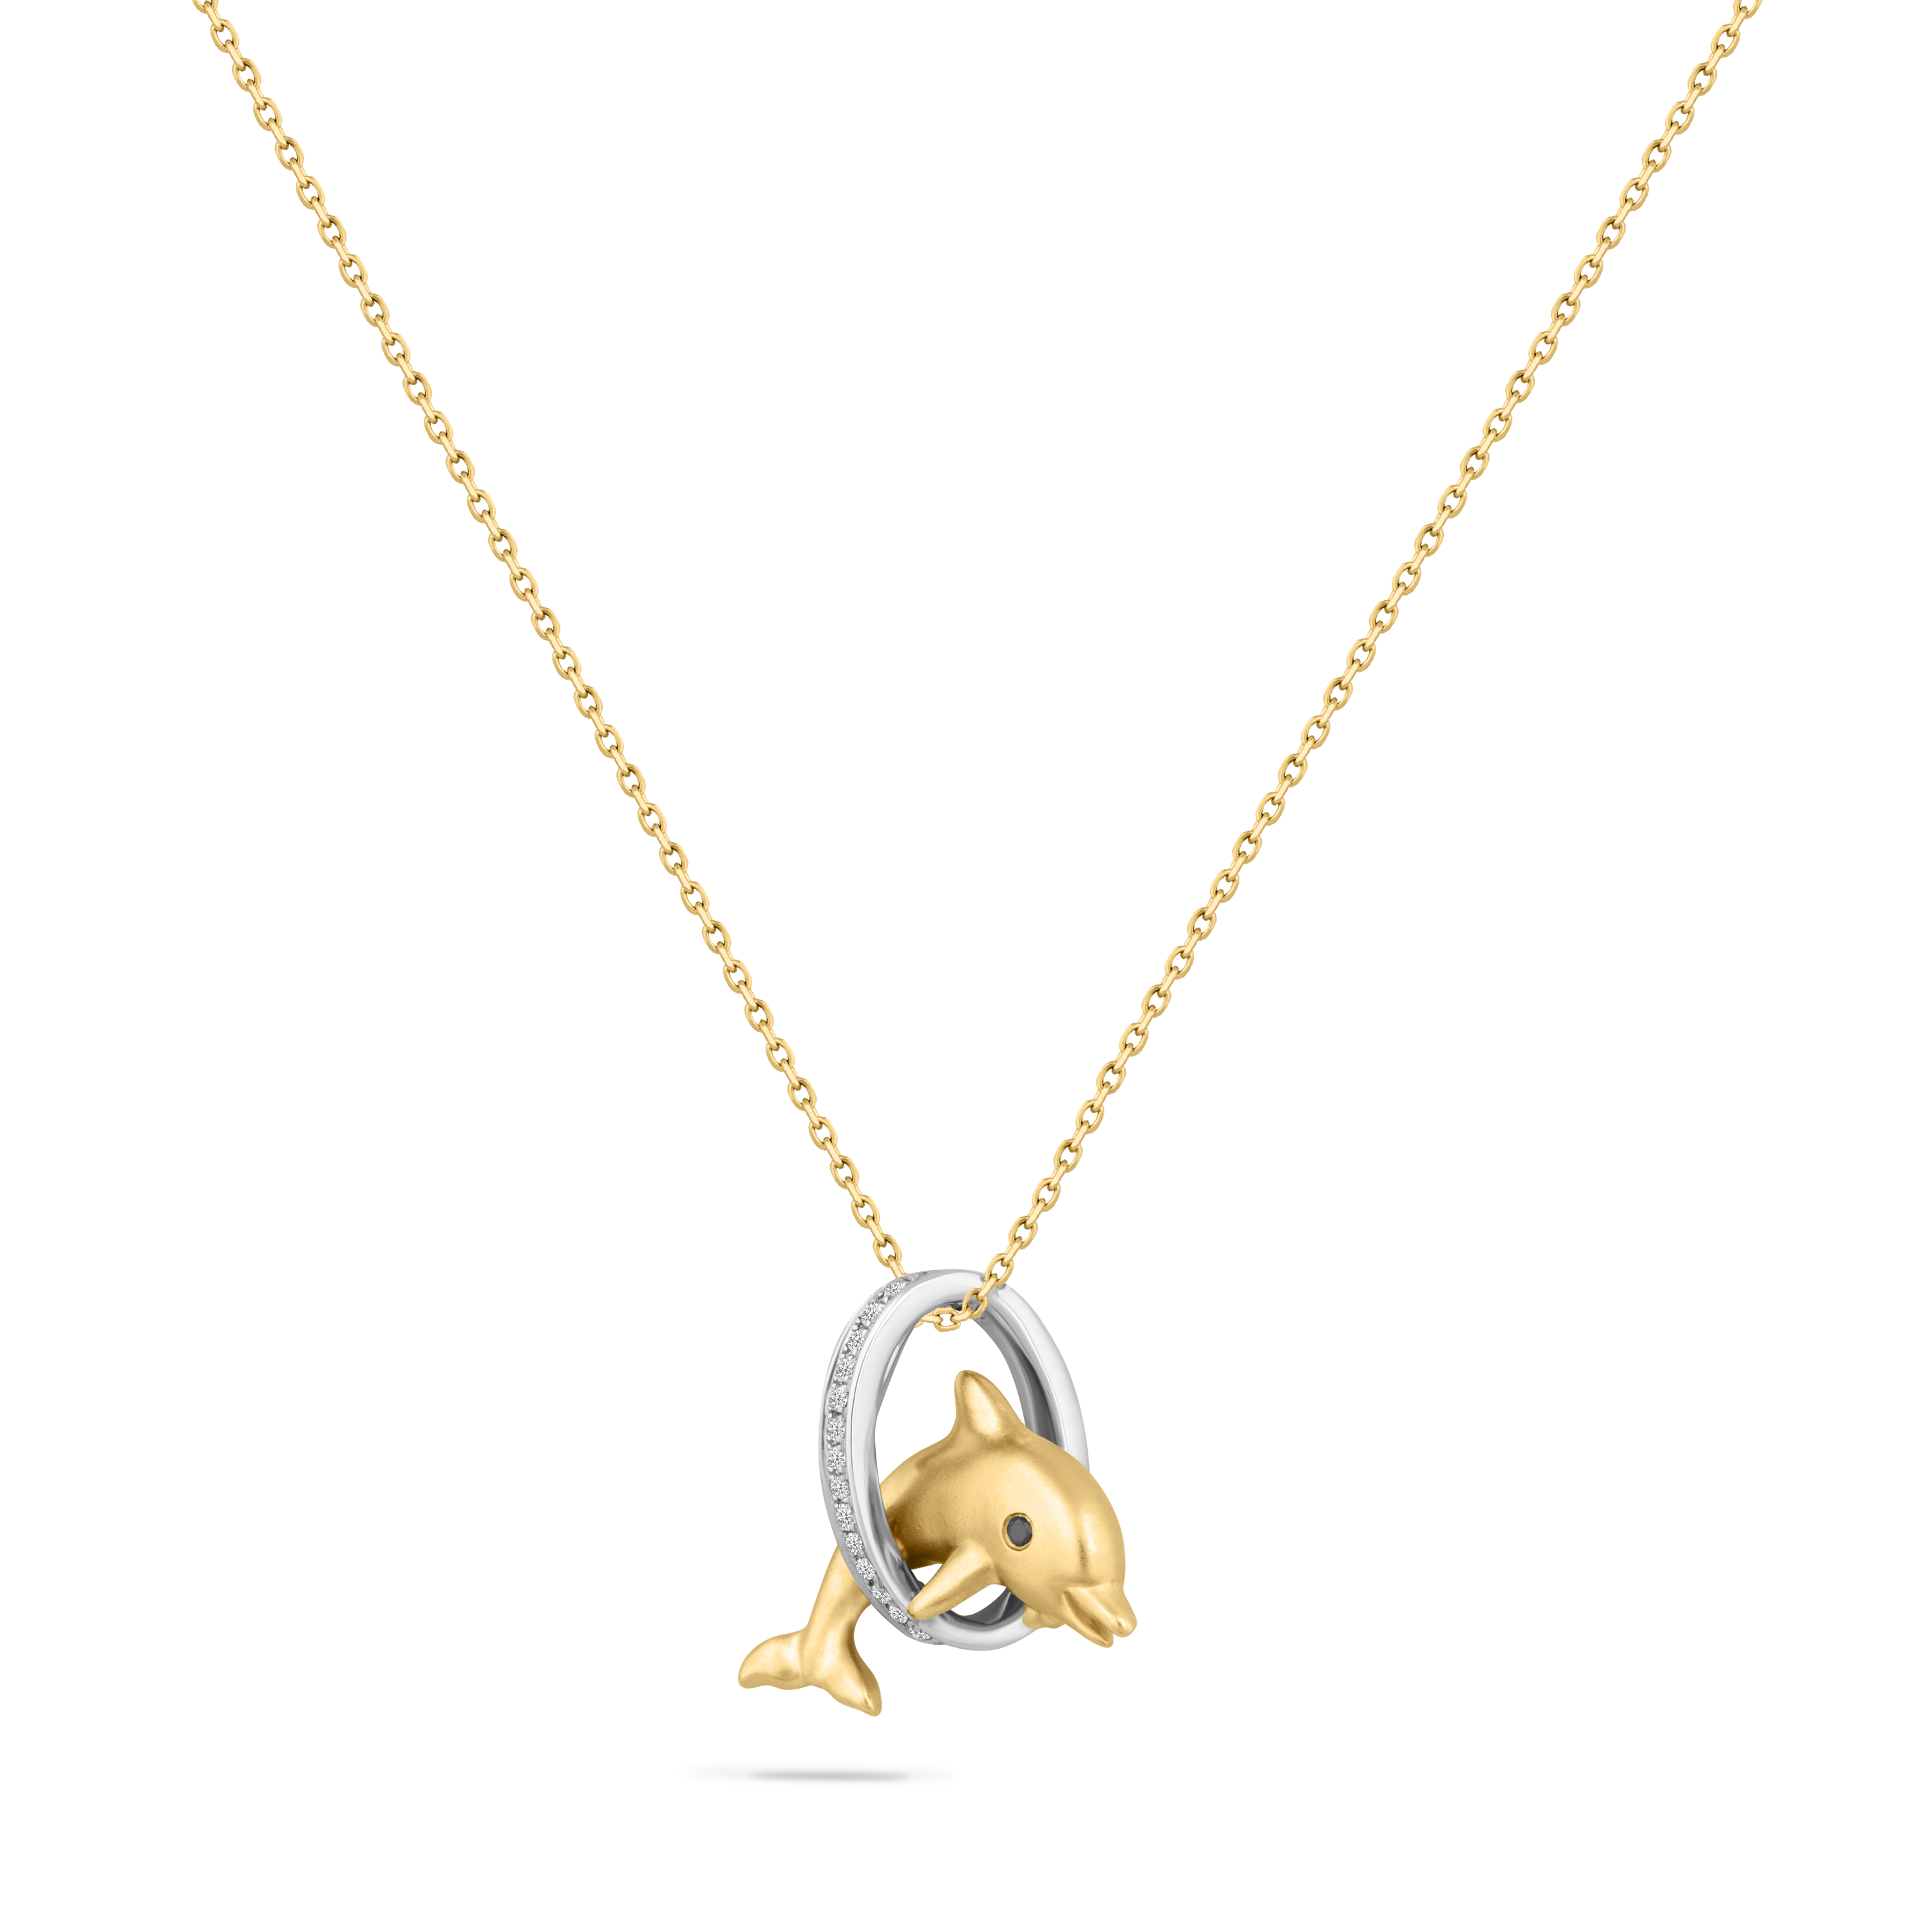 14K JUMPING DOLPHIN PENDANT WITH  14 DIAMONDS 0.05CT & 1 BLACK DIAMOND 0.005CT ON 18 INCHES CABLE CHAIN